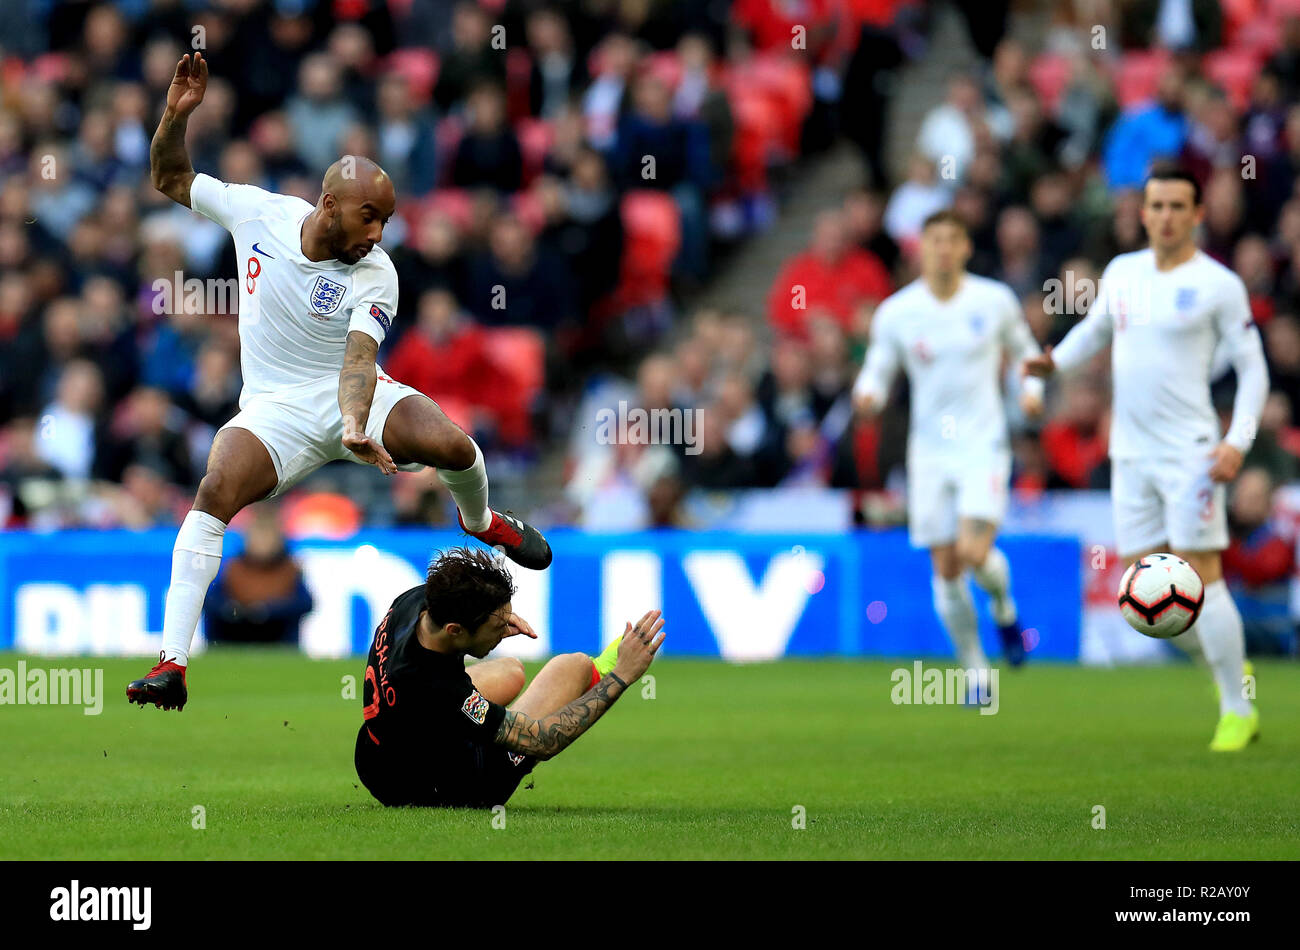 Croatia's Sime Vrsaljko (left) slides in on England's Fabian Delph (right) during the UEFA Nations League, Group A4 match at Wembley Stadium, London. Stock Photo